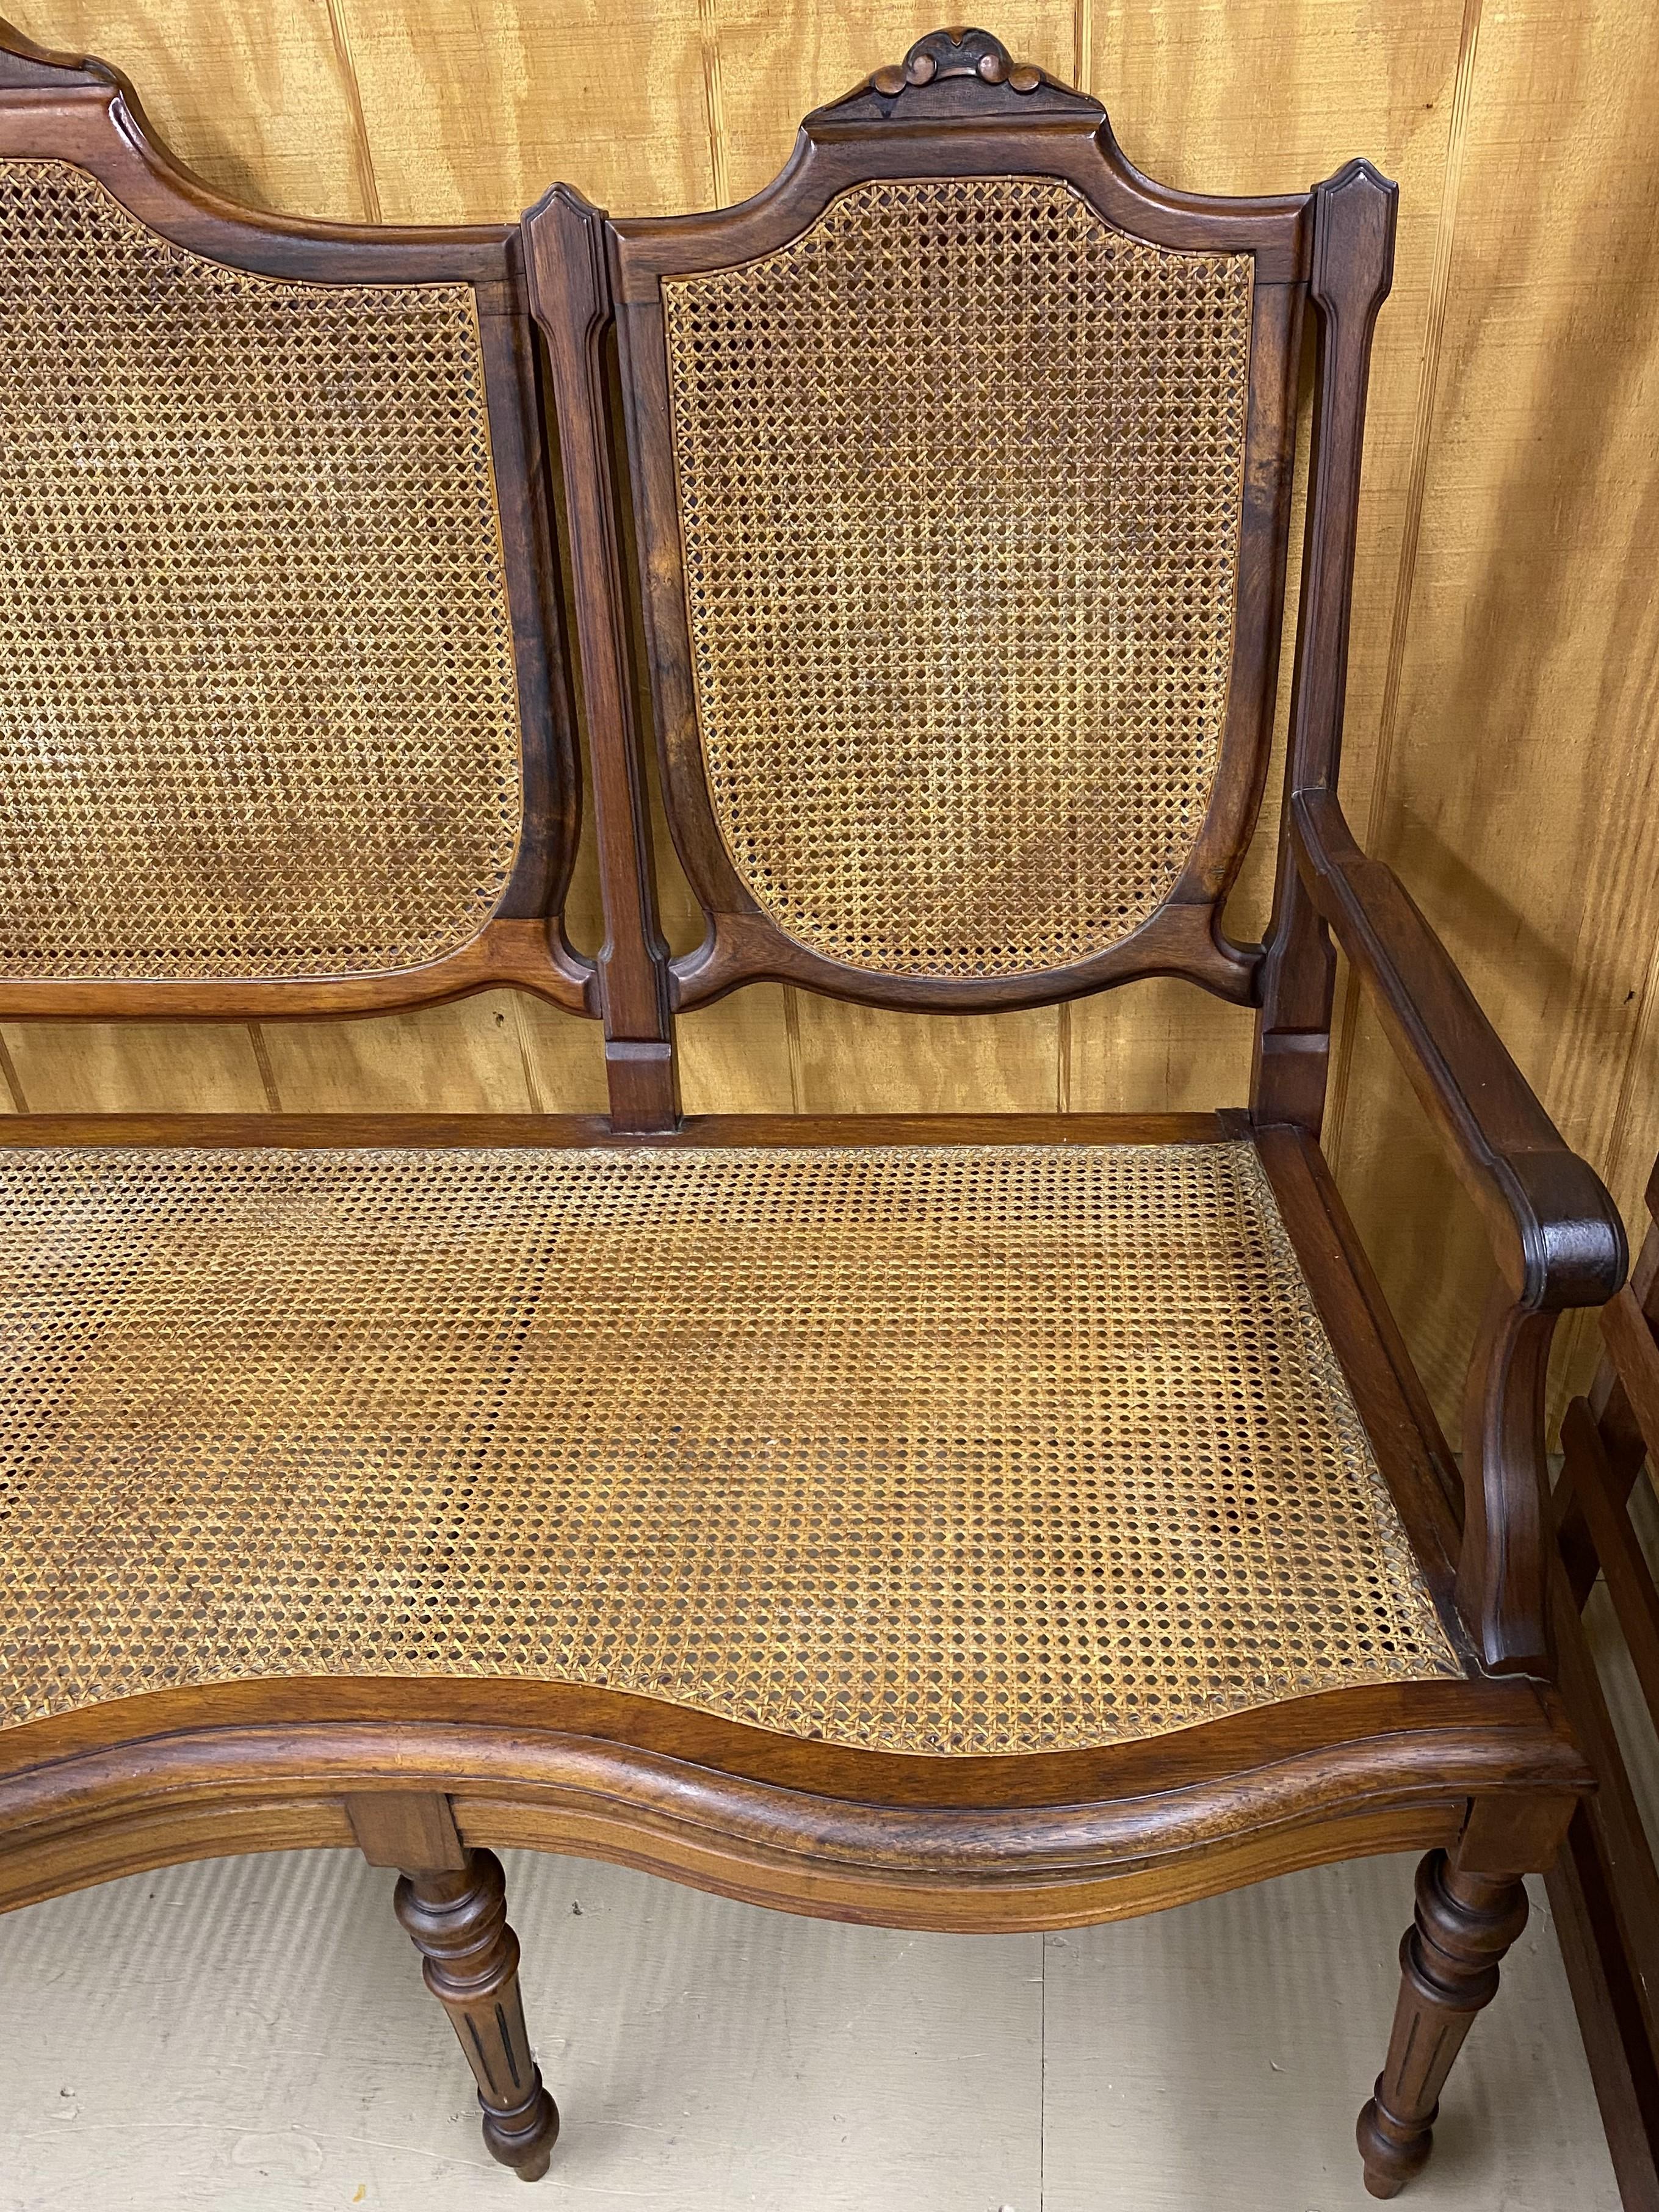 19th c Brazilian Hardwood Settee with Caned Seat and Back In Good Condition For Sale In Milford, NH